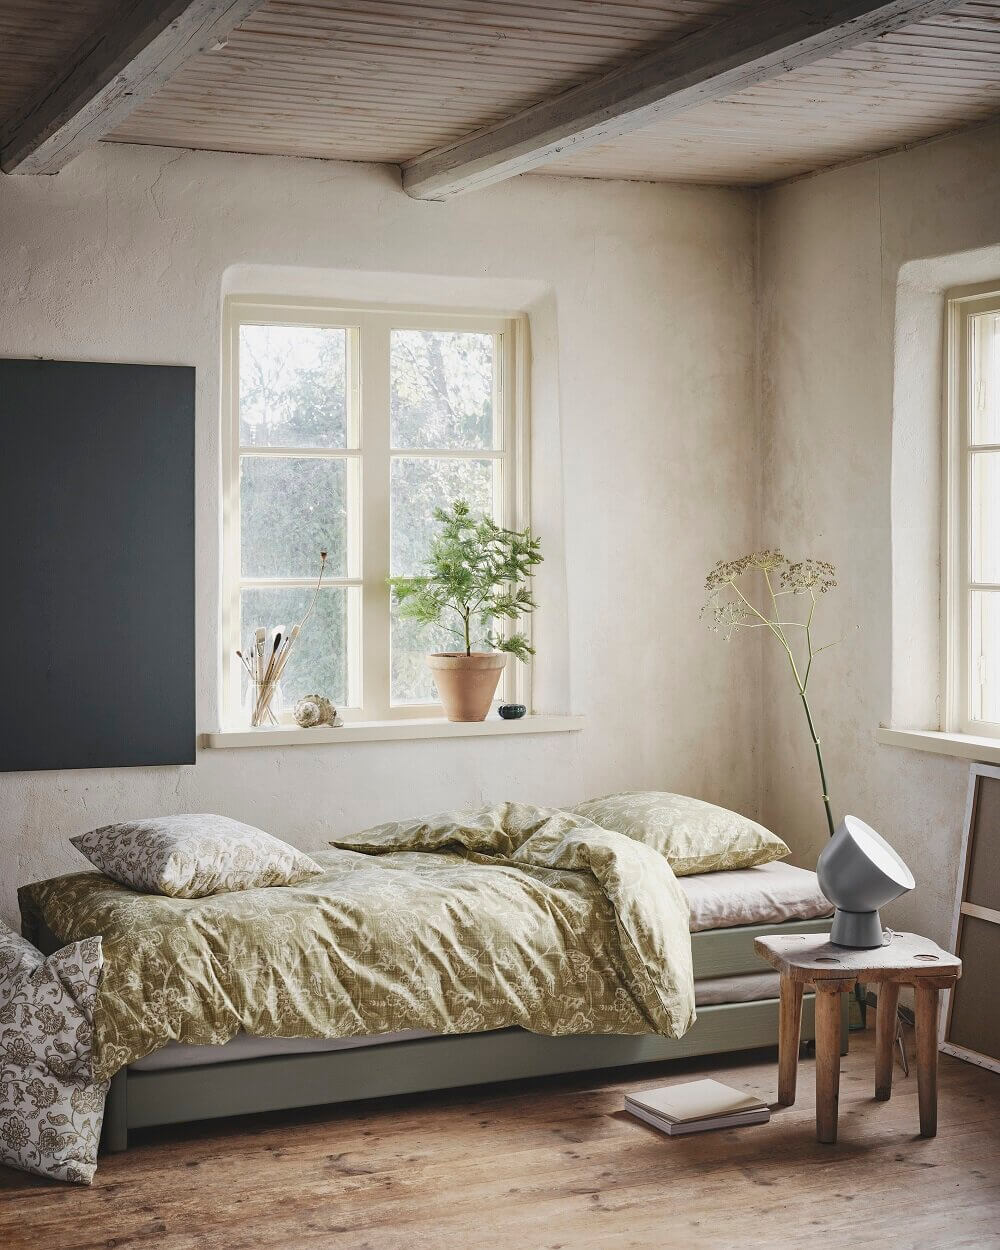 ikea spring collection 2020 mindful living nordroom1 IKEA Spring Collection 2020: Mindful Living and Close to Nature